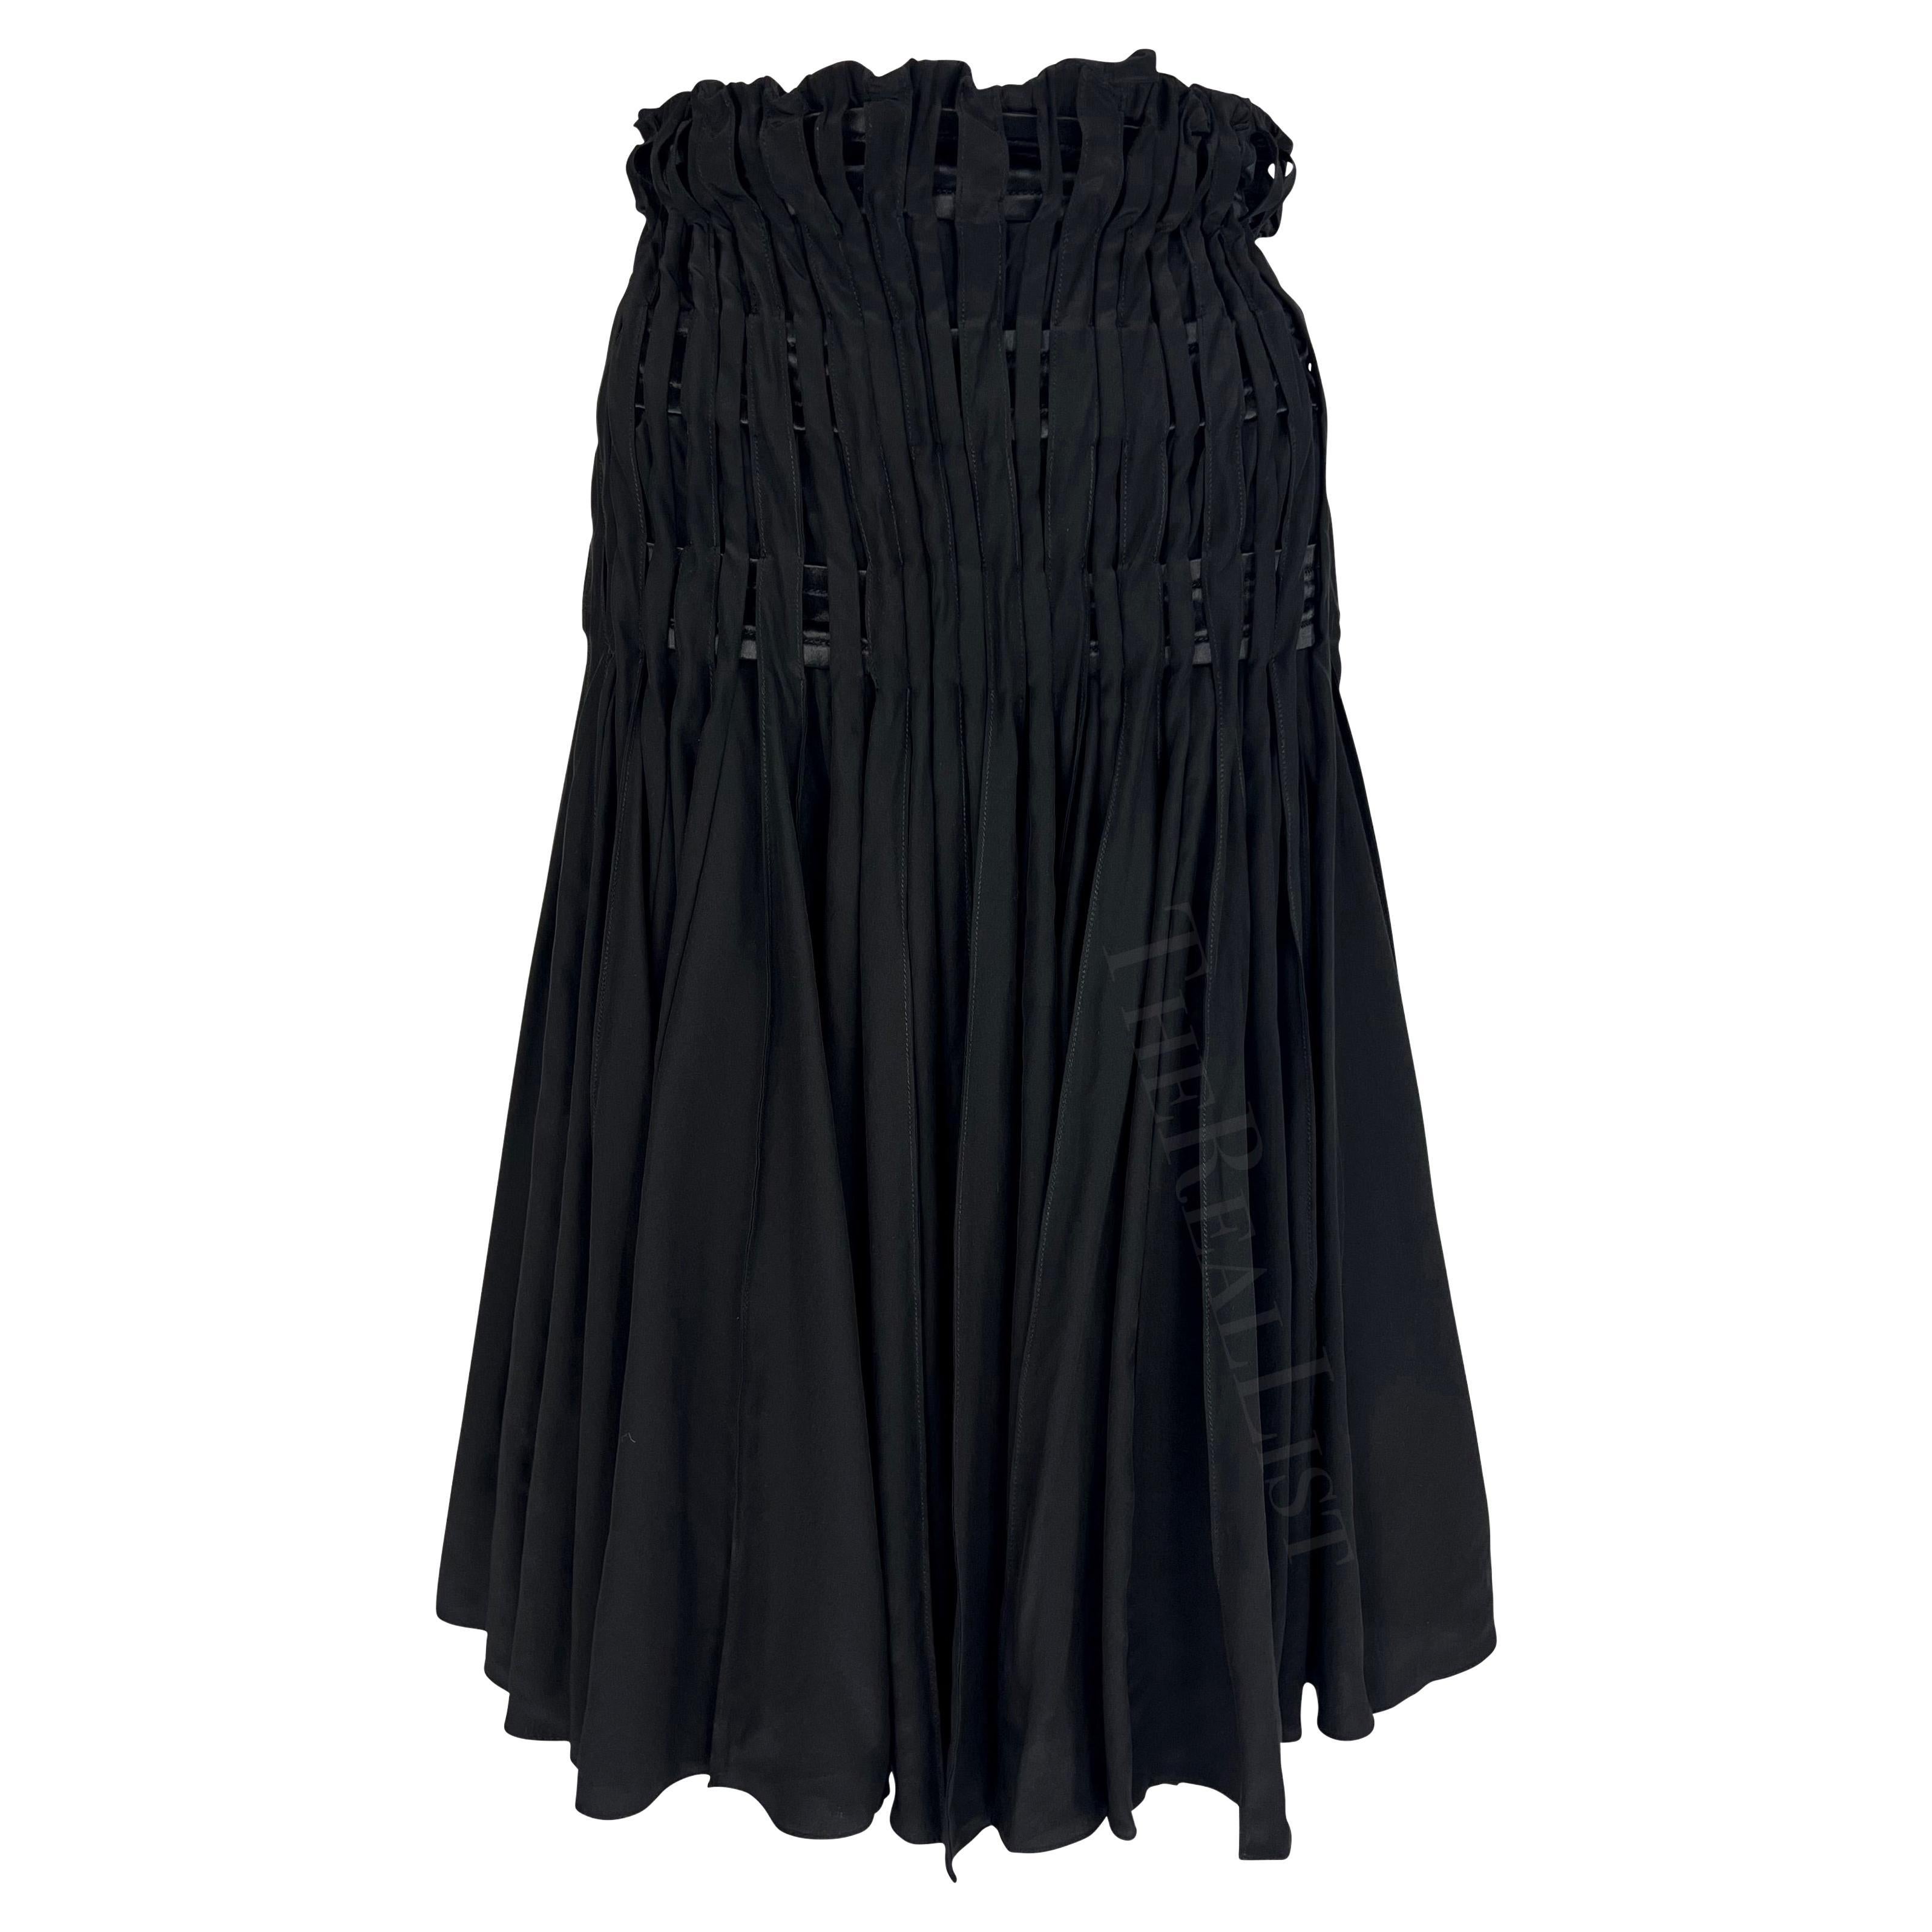 F/W 2001 Yves Saint Laurent by Tom Ford Pleated Black Satin Flare Skirt For Sale